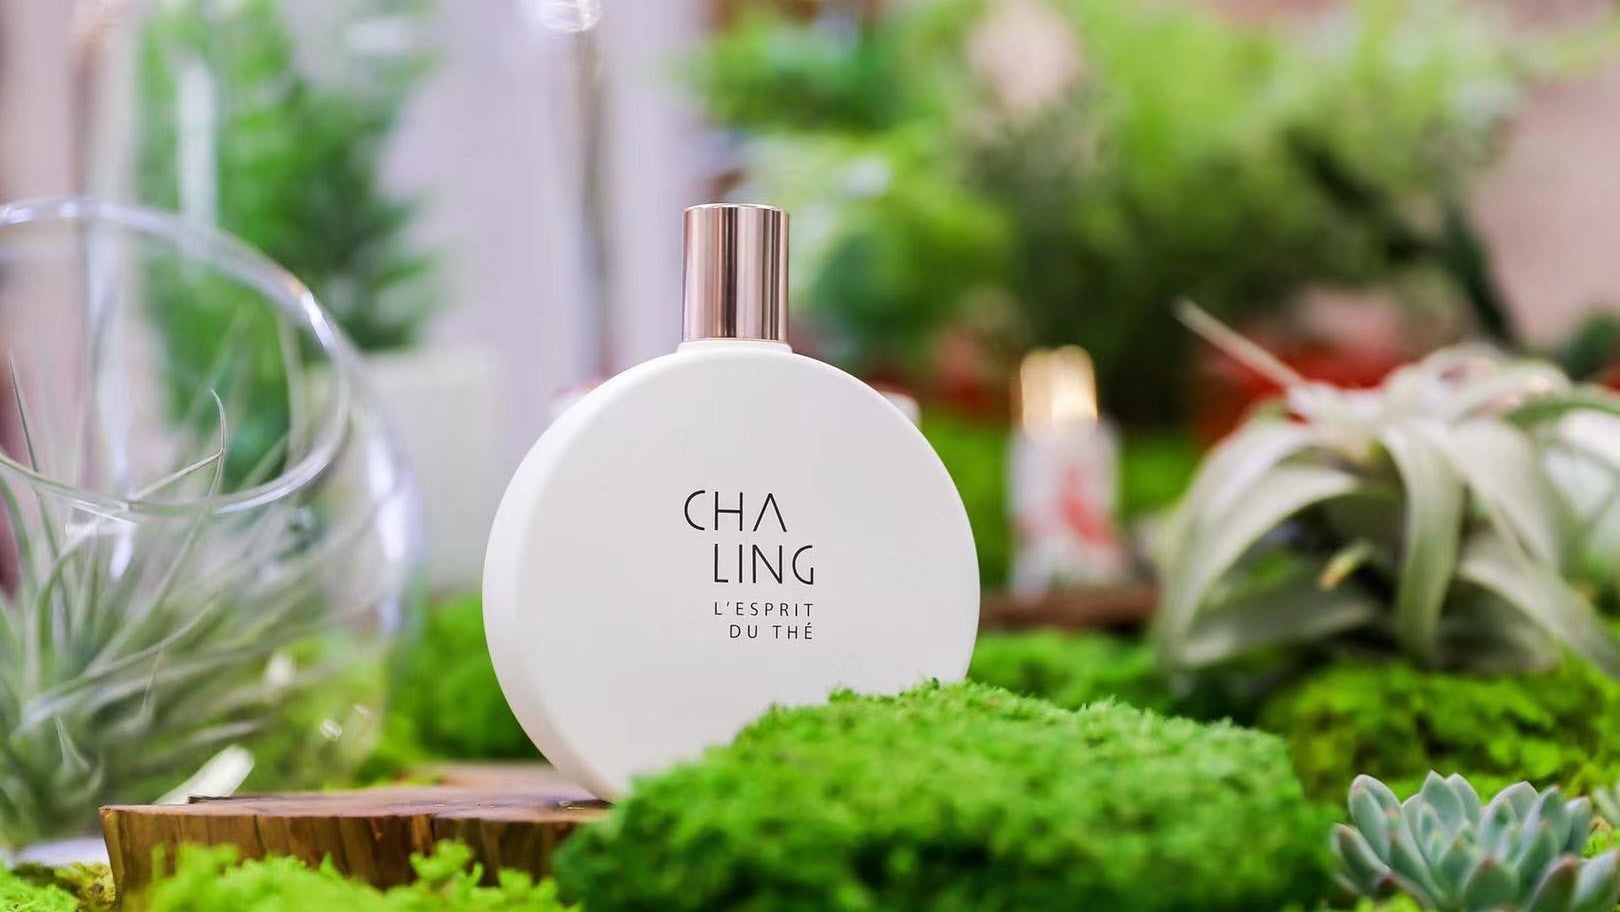 The shuttering of LVMH’s Chinese tea beauty brand Cha Ling's physical doors and official WeChat store is cited as part of its new business strategy. But will China ever want faux ‘Guochao’ brands? Photo: Cha Ling